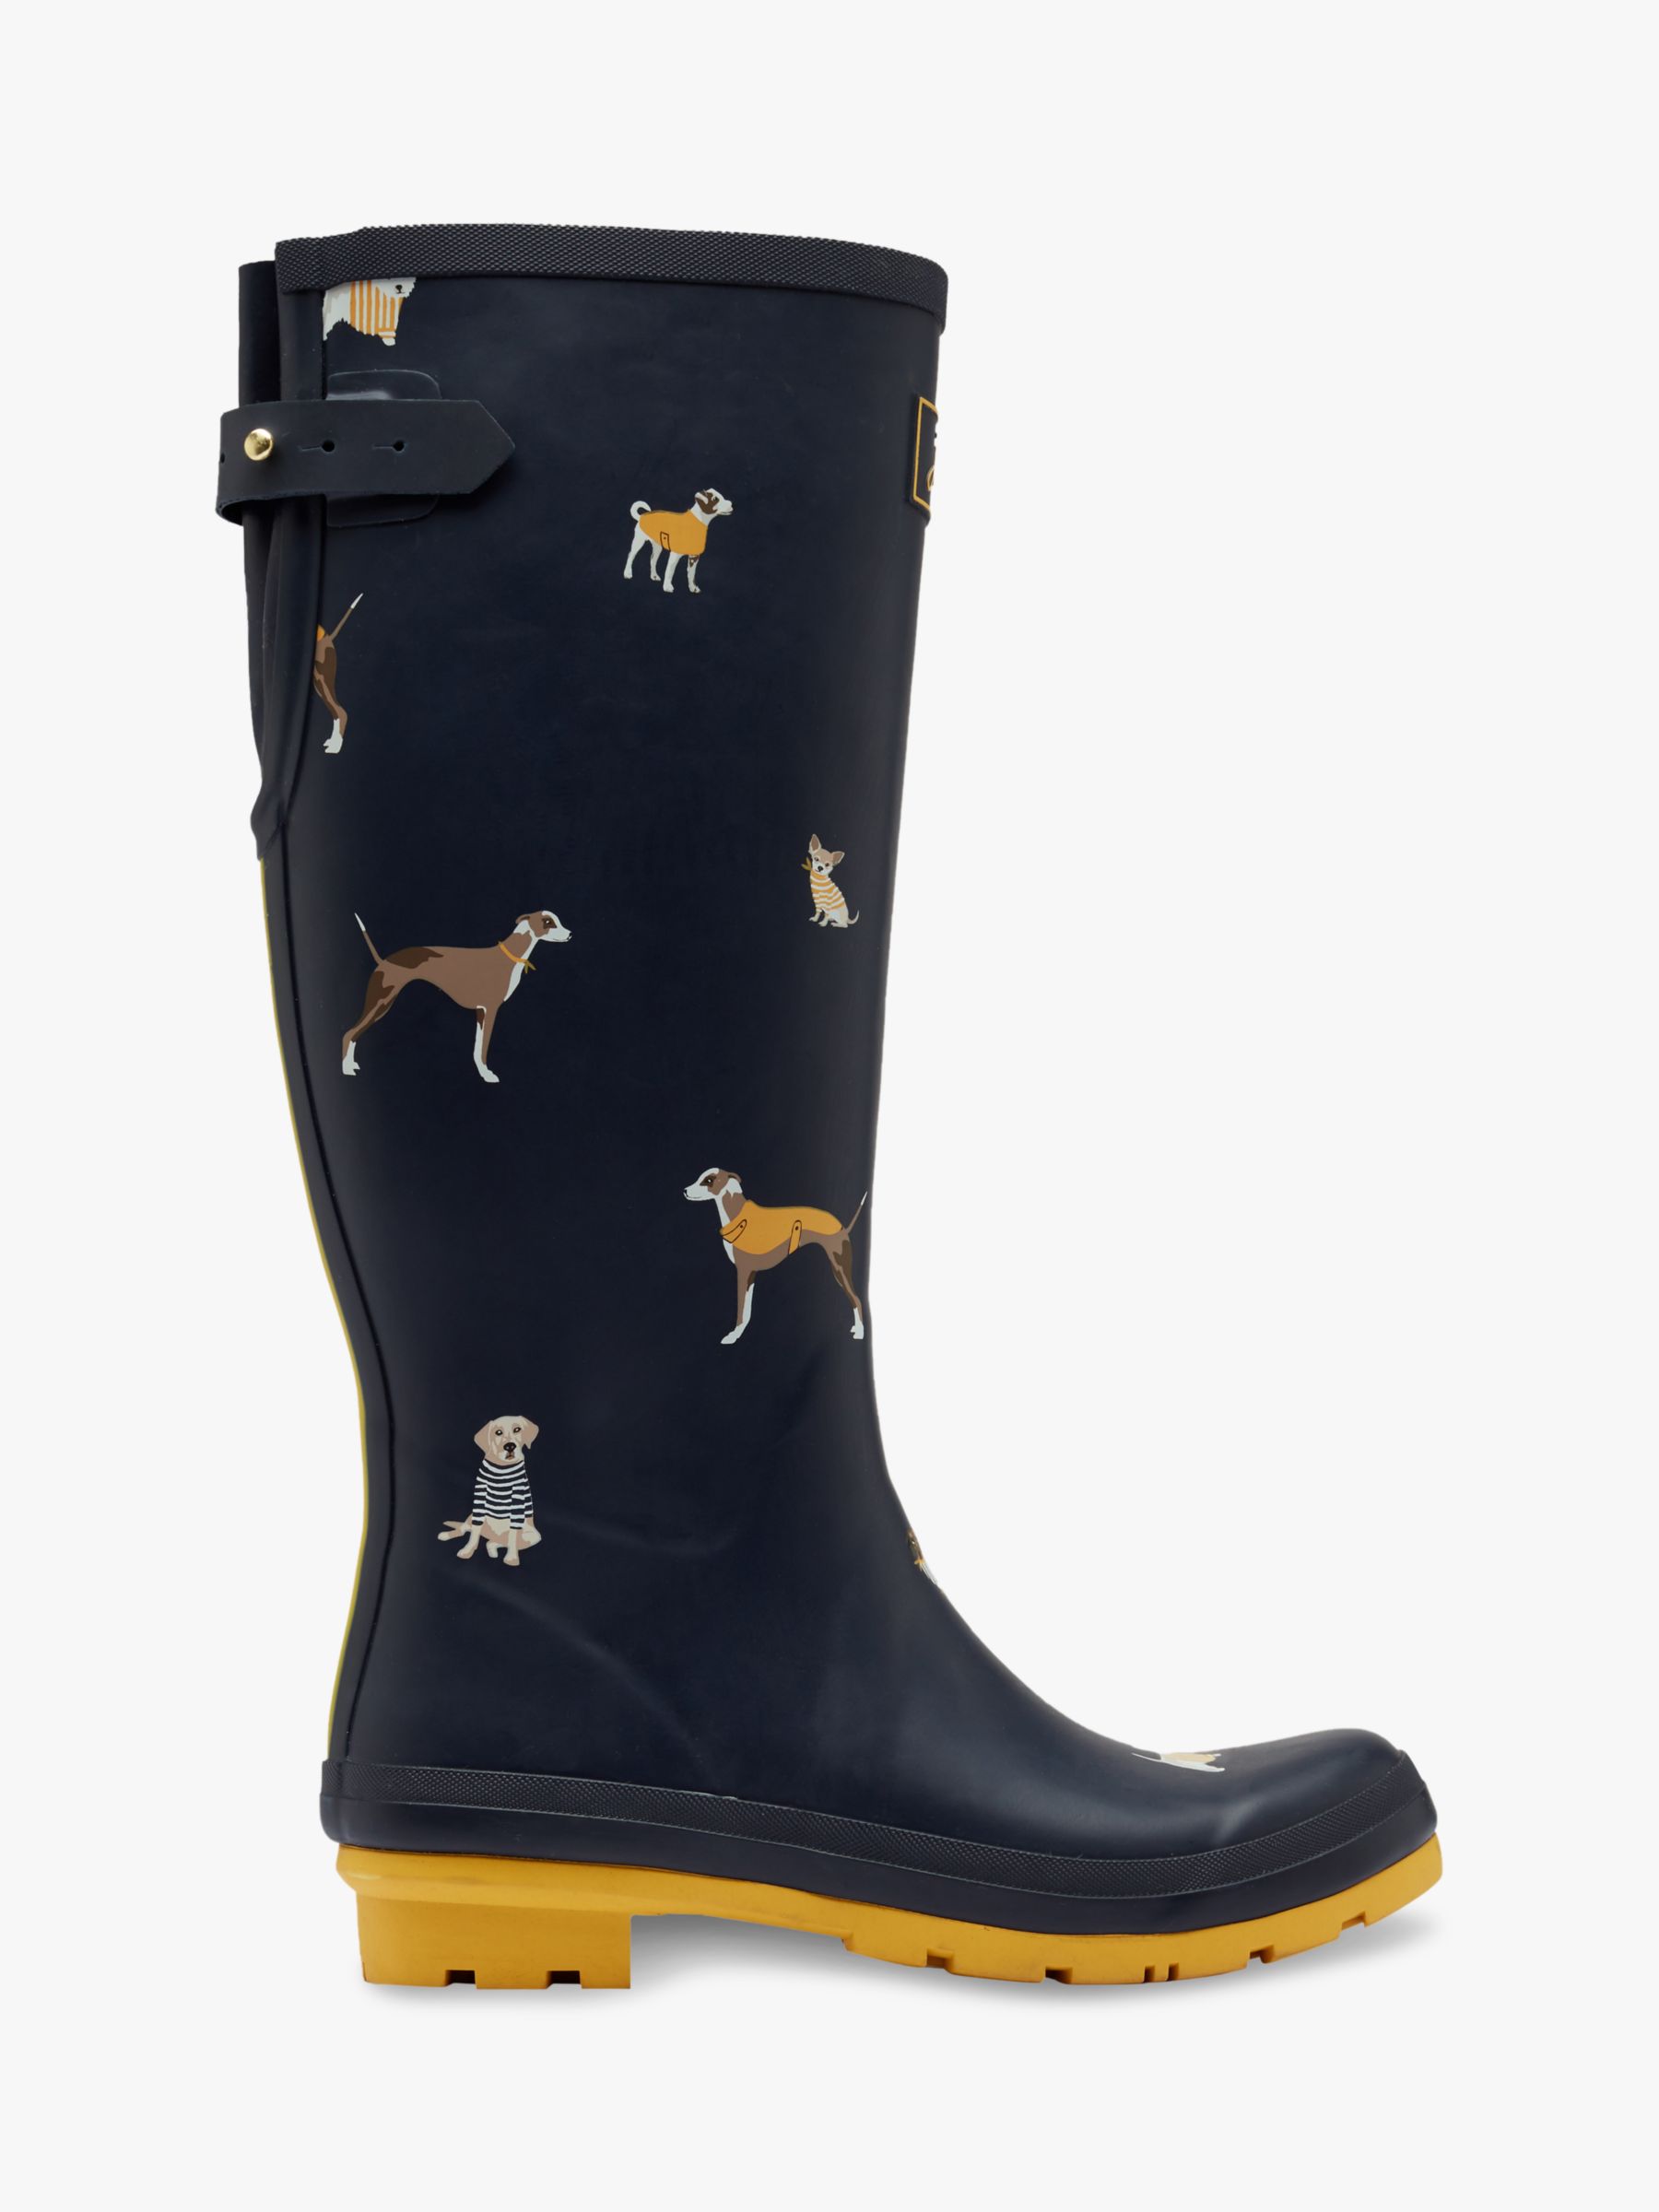 Joules Dog Print Waterproof Tall Wellington Boots, Navy